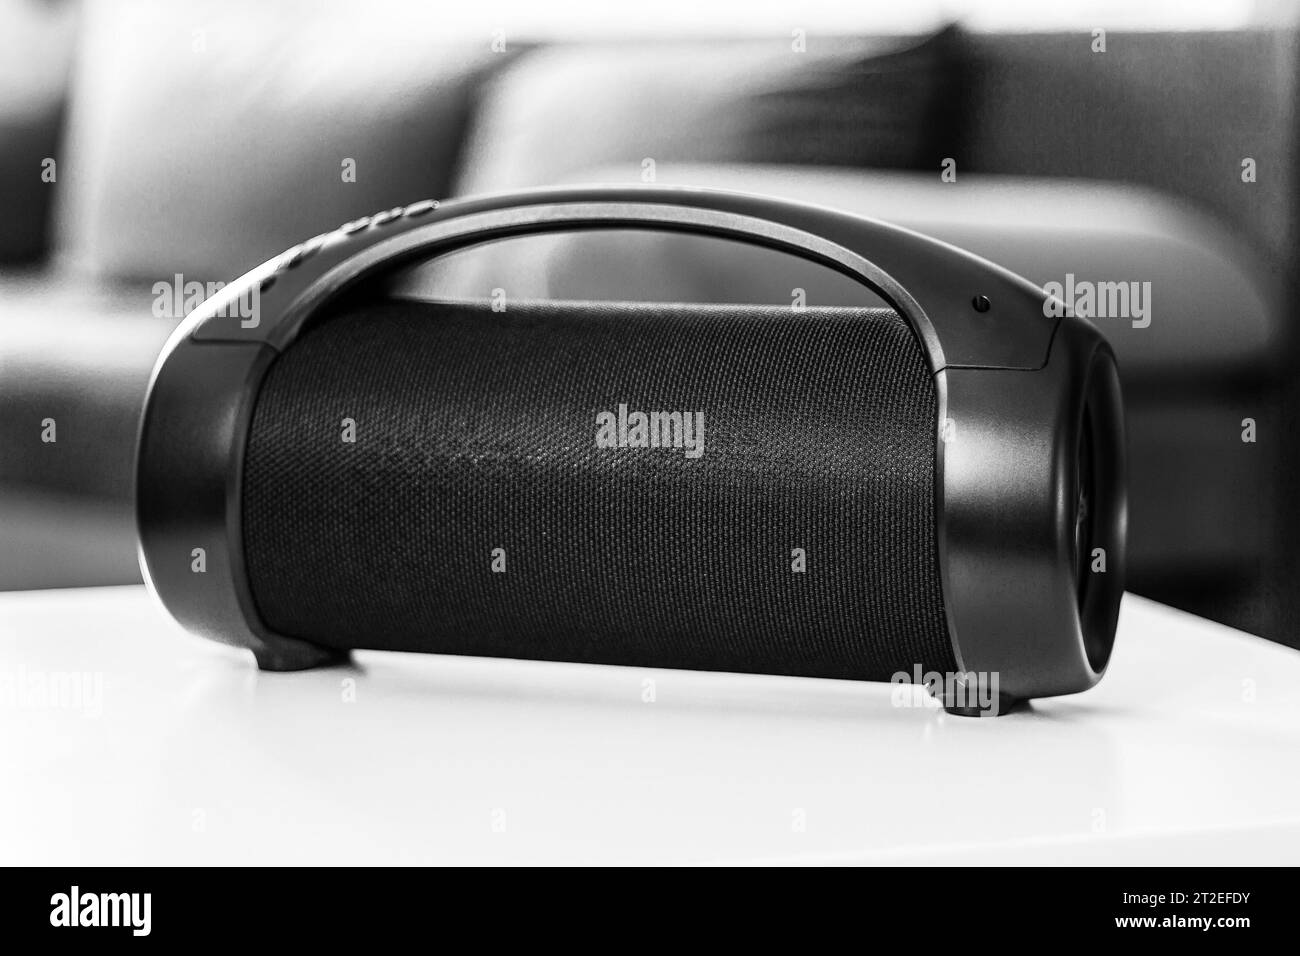 Portable wireless speaker on a table indoors against the background of a sofa, black and white photo, shallow depth of field Stock Photo